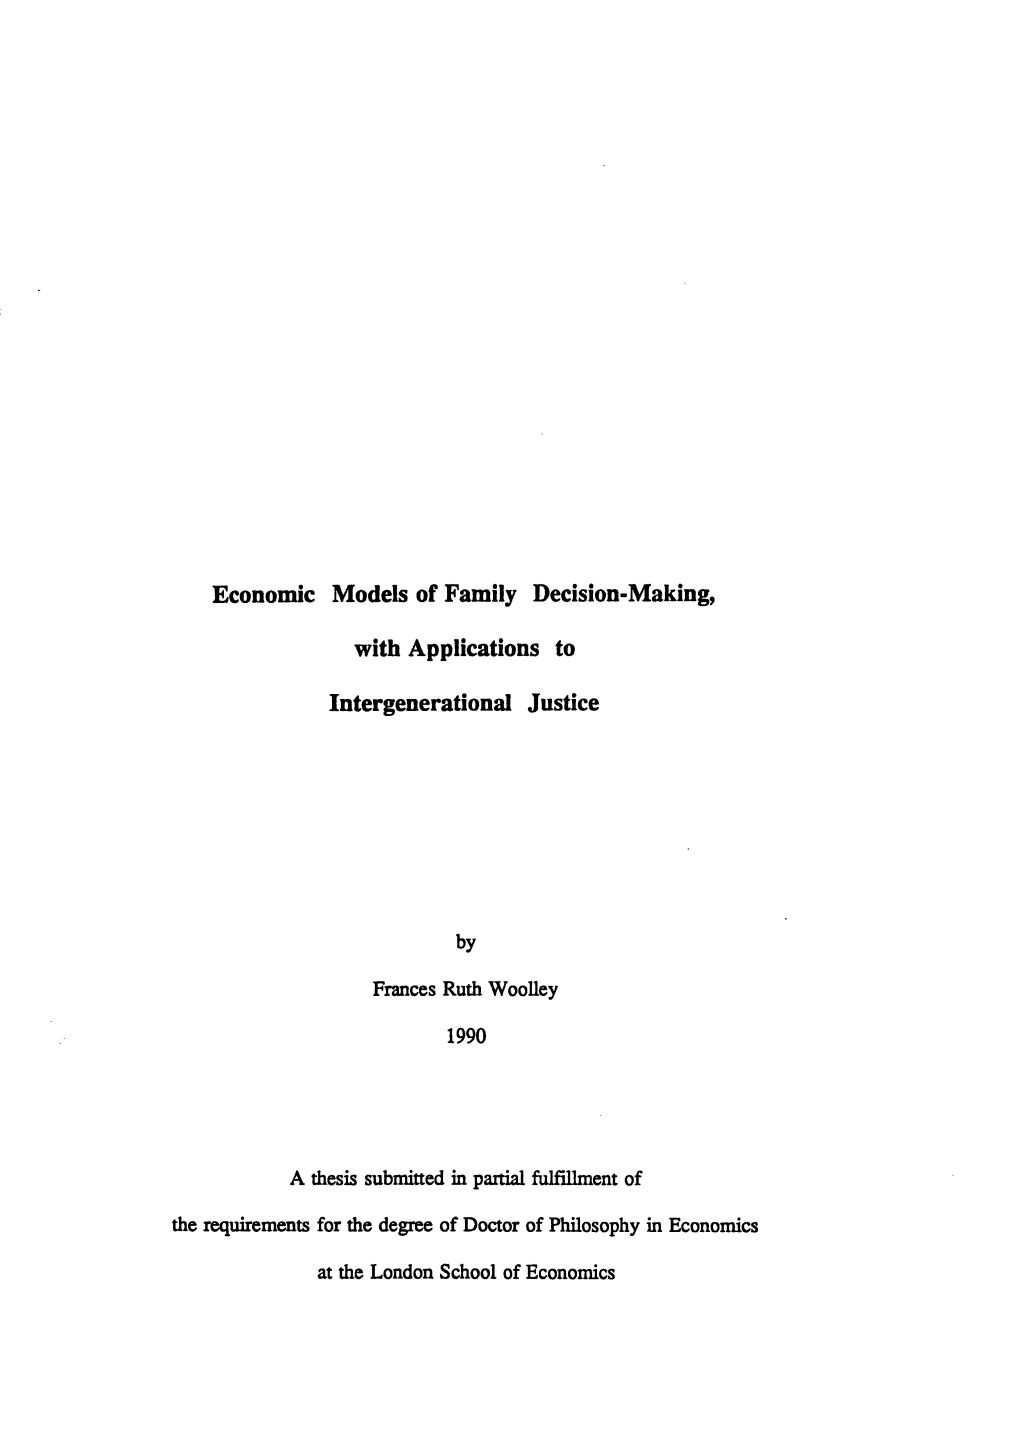 Economic Models of Family Decision-Making, with Applications